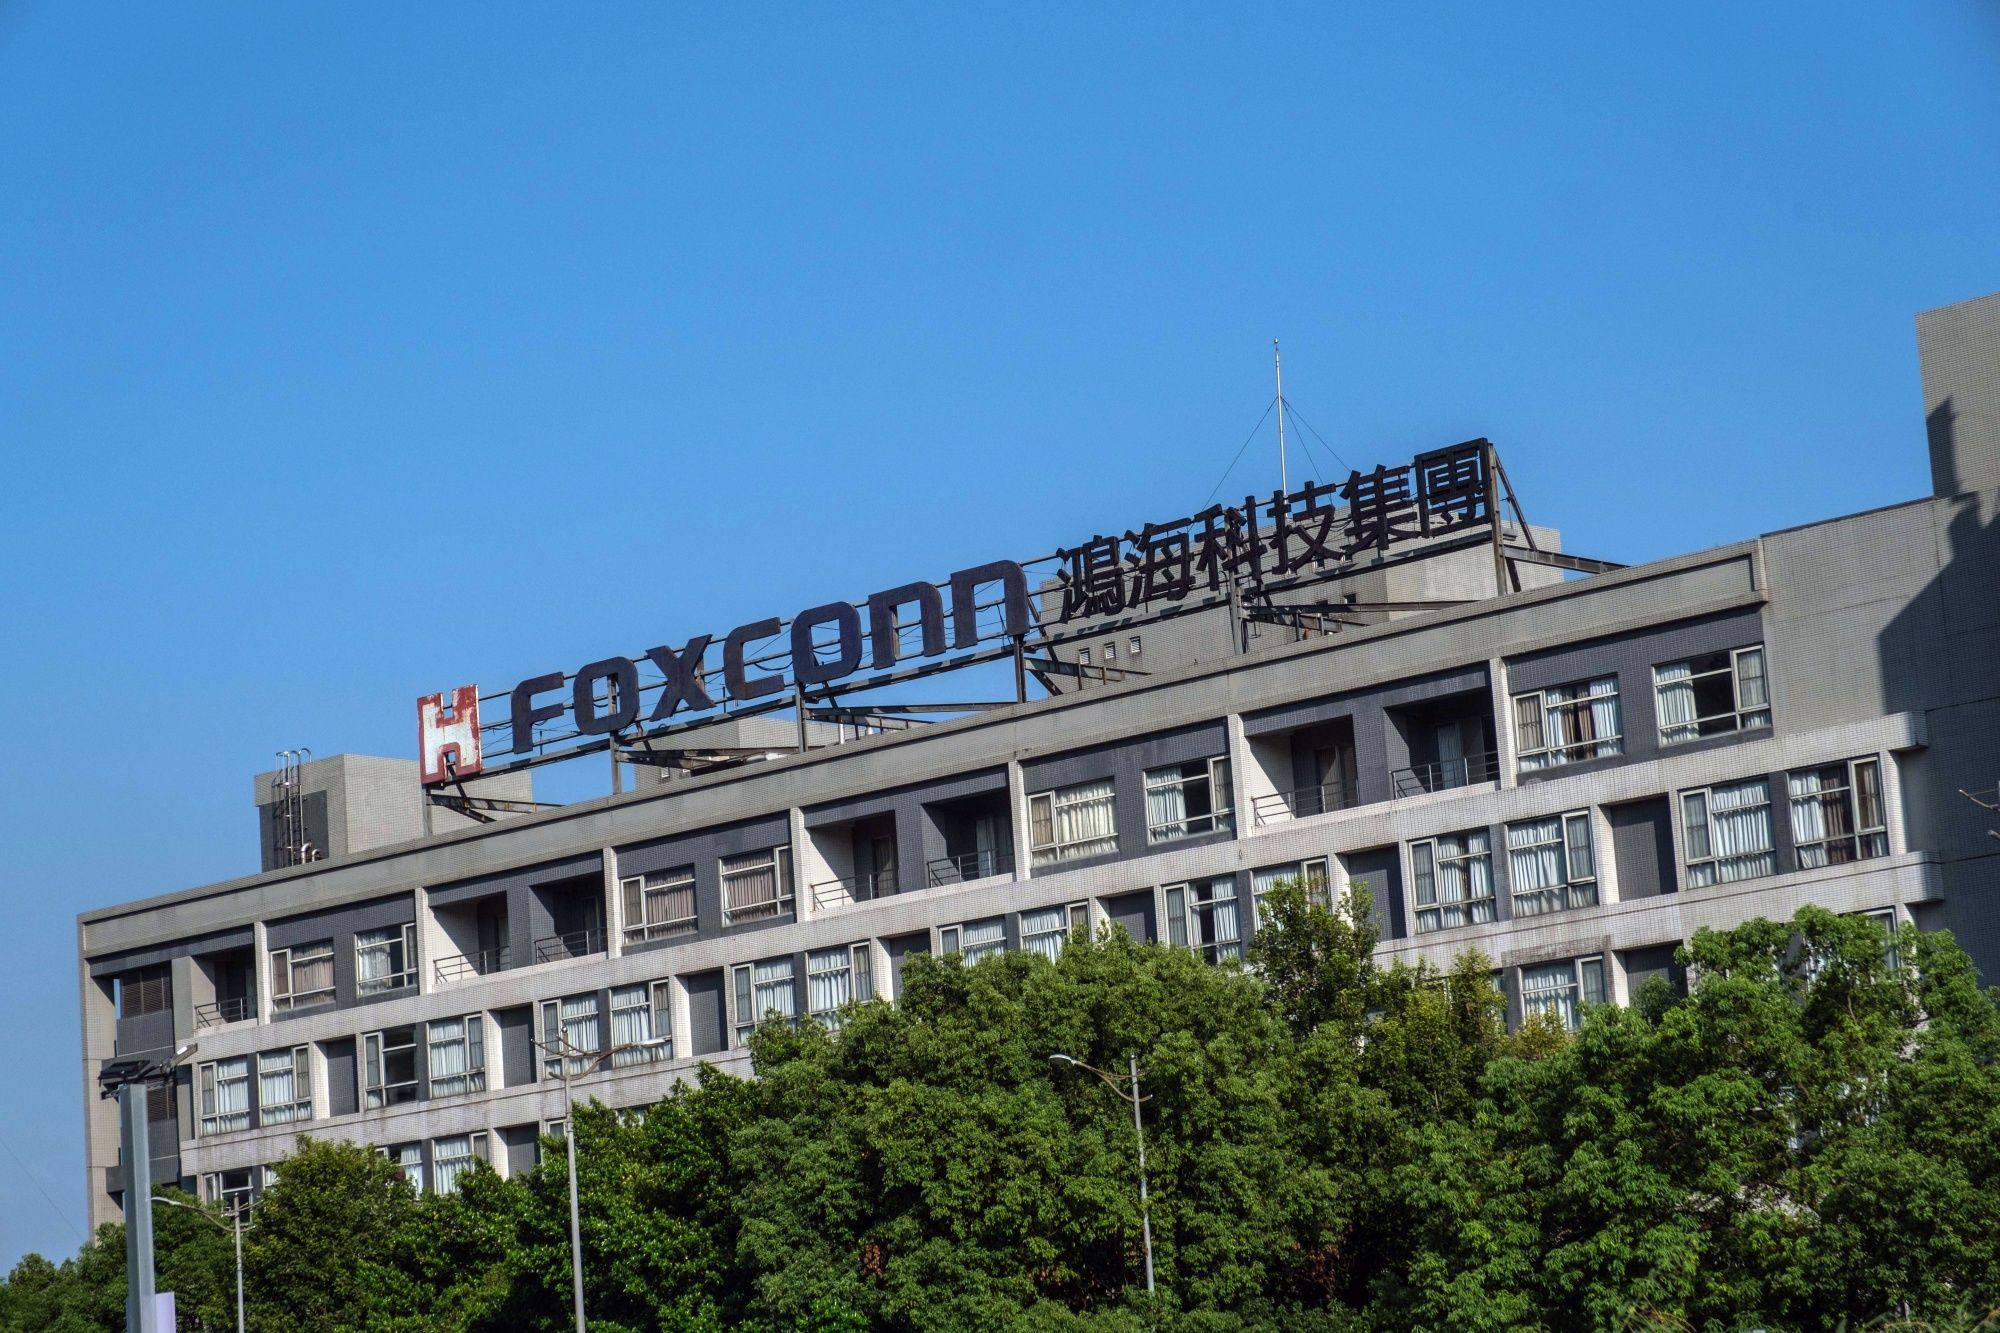 The Foxconn headquarters in New Taipei City, Taiwan. Photo: Bloomberg